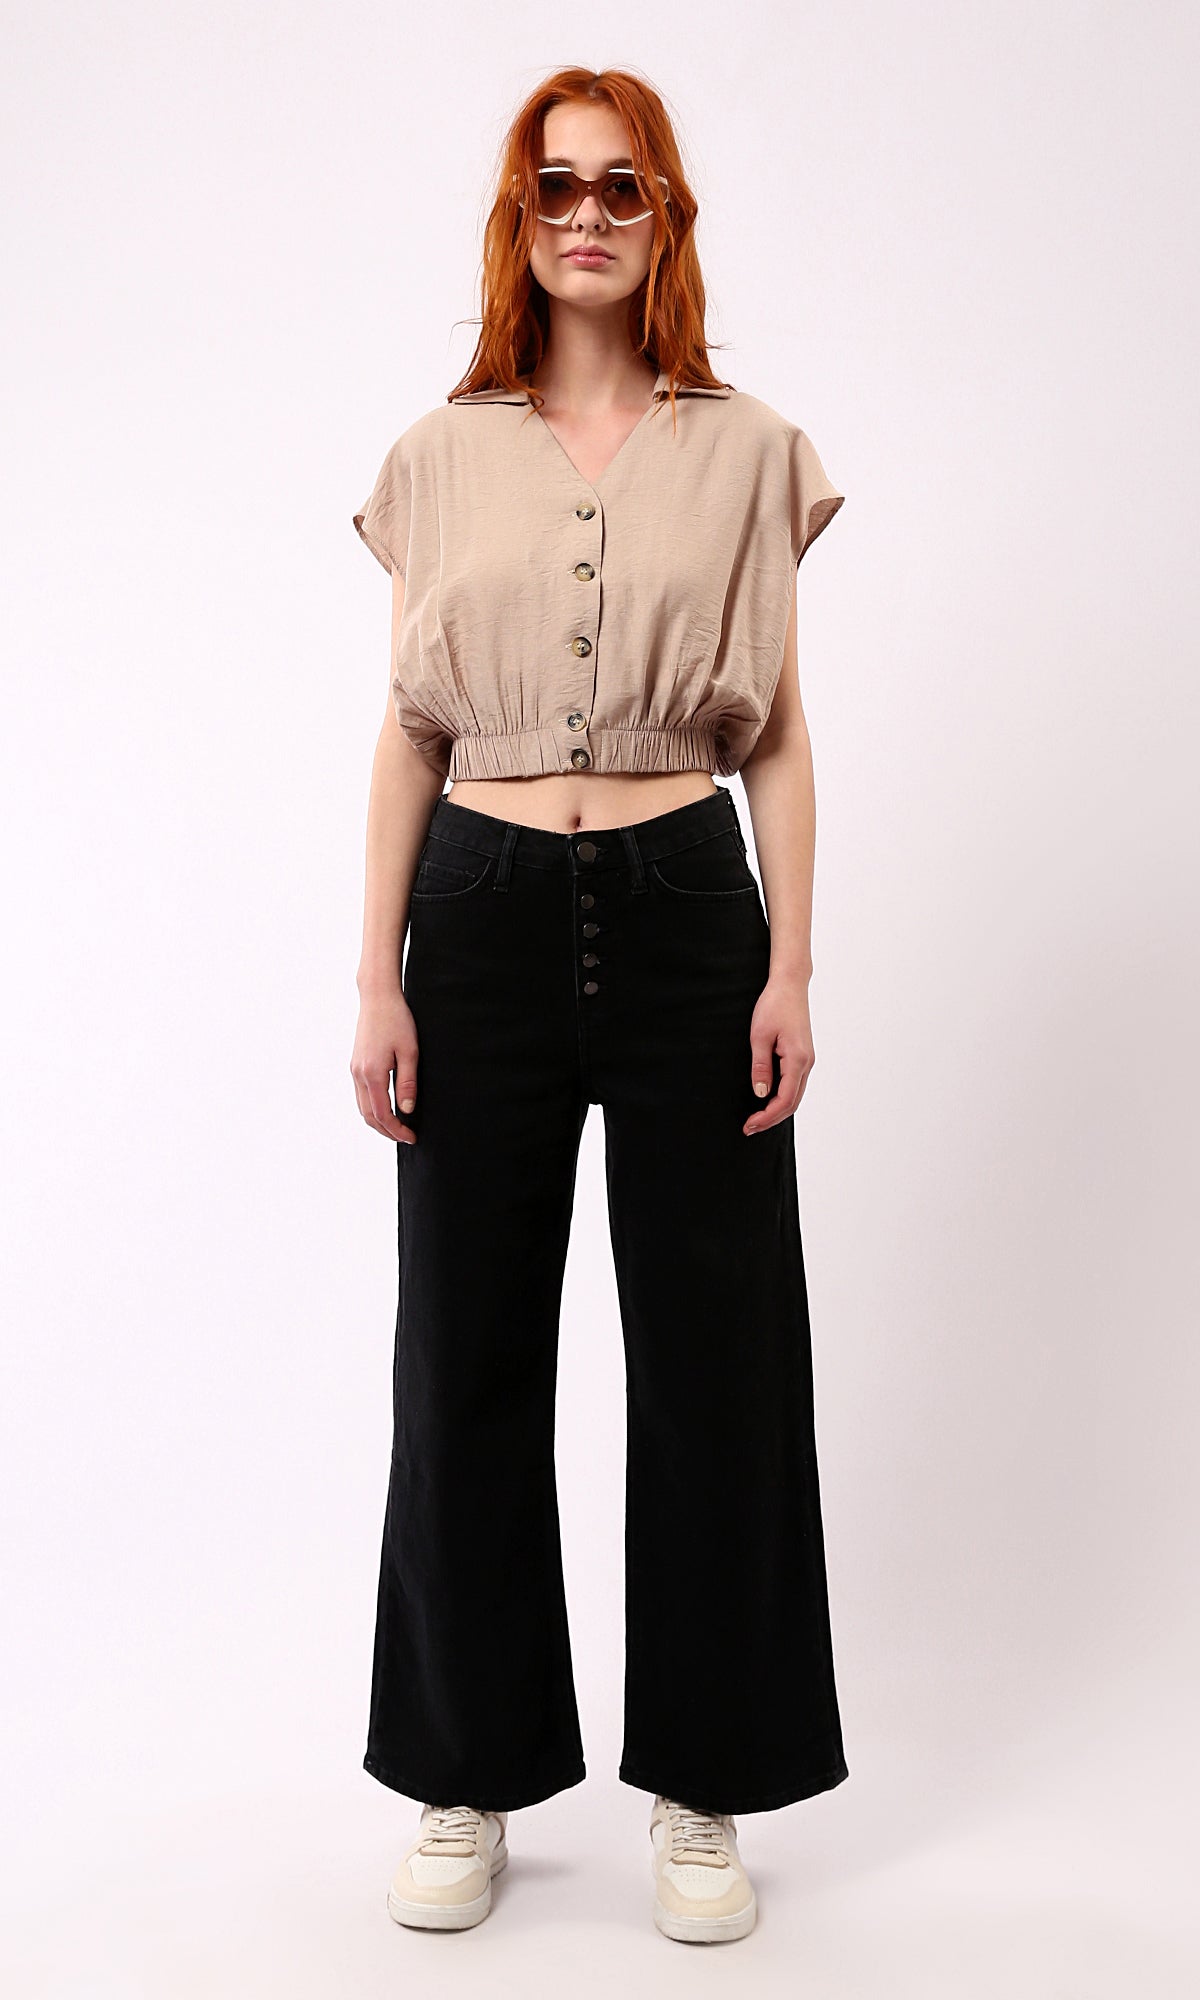 O179142 Light Coffee Cap Sleeves Buttoned Shirt With Hem